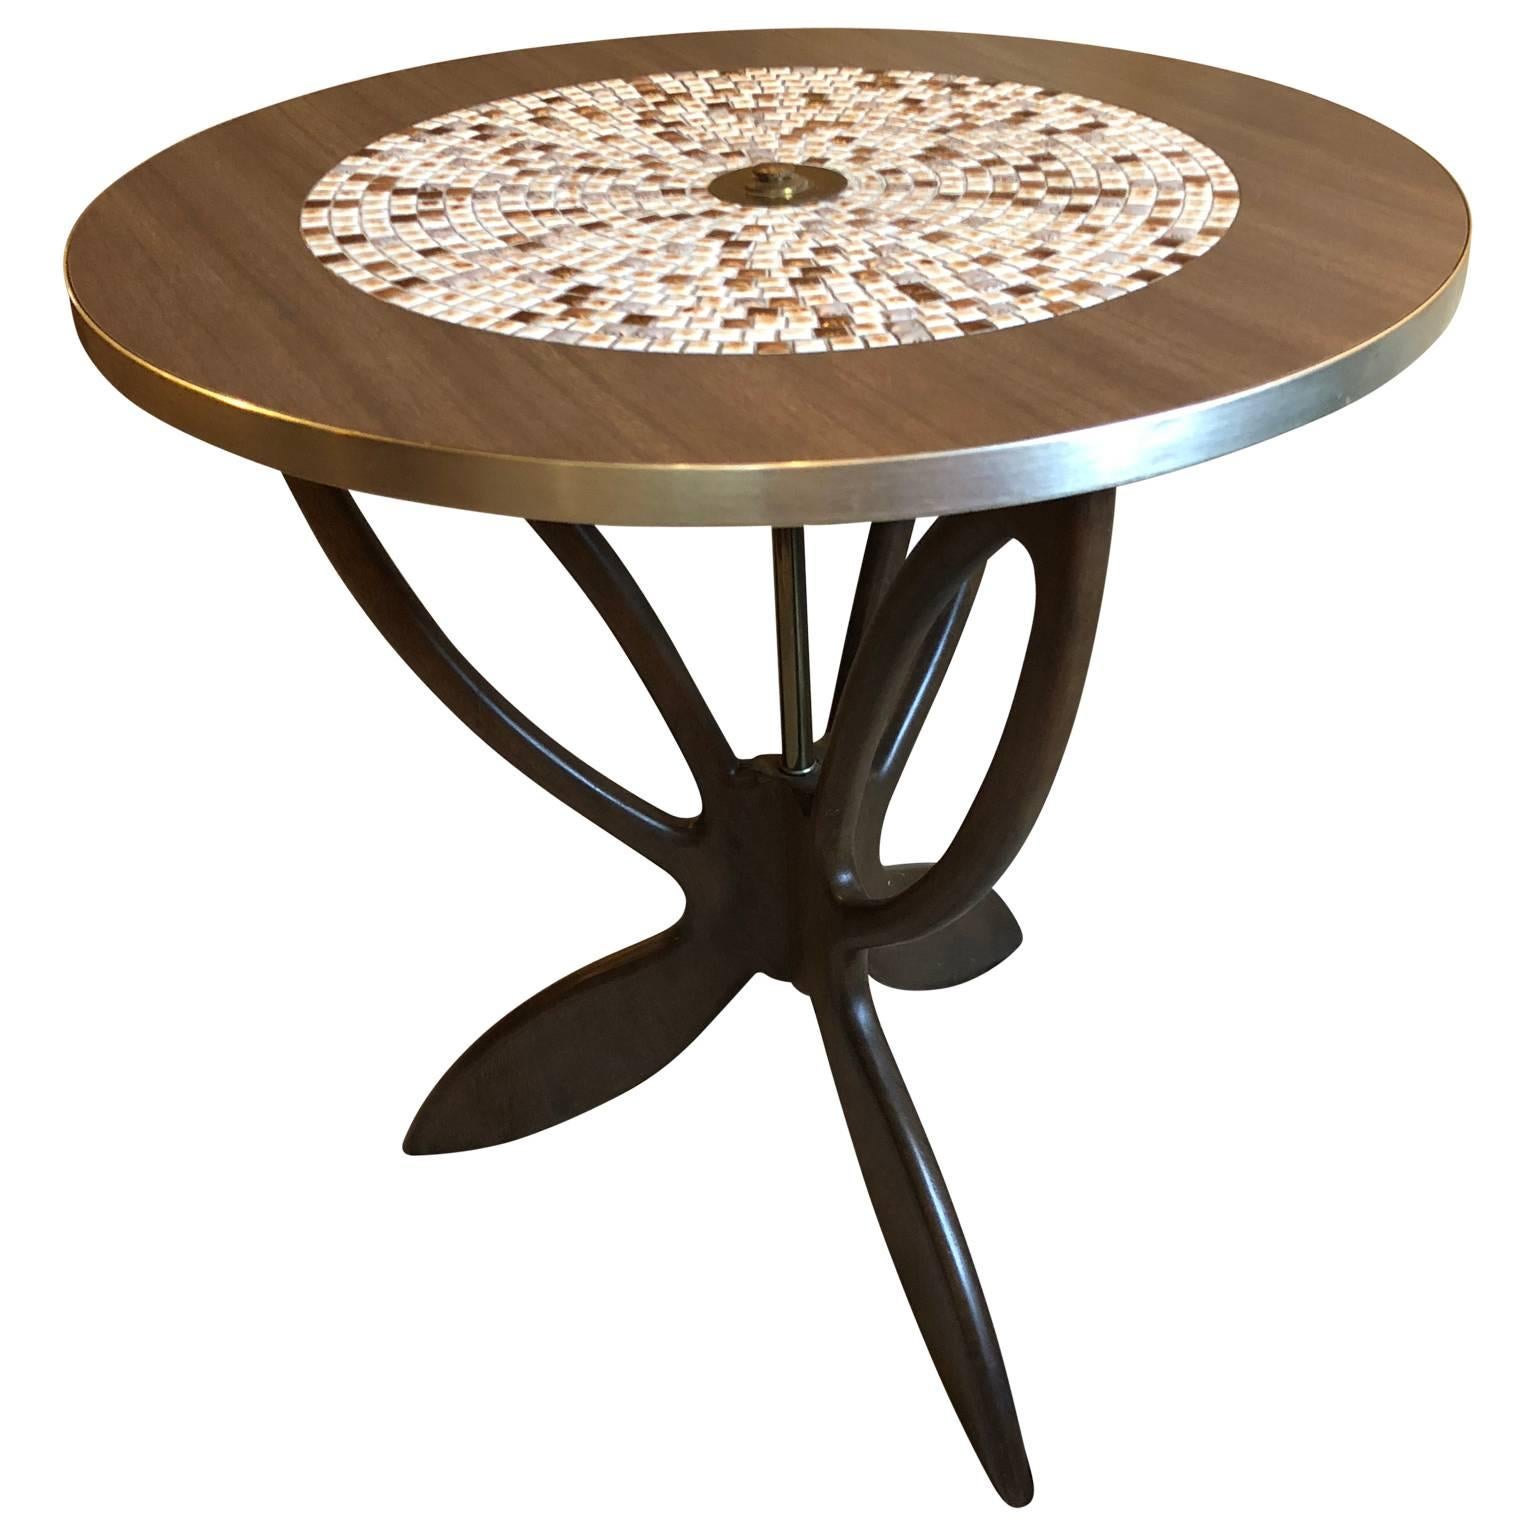 Round Mid-Century Modern Tile Top Butterfly Cocktail Table